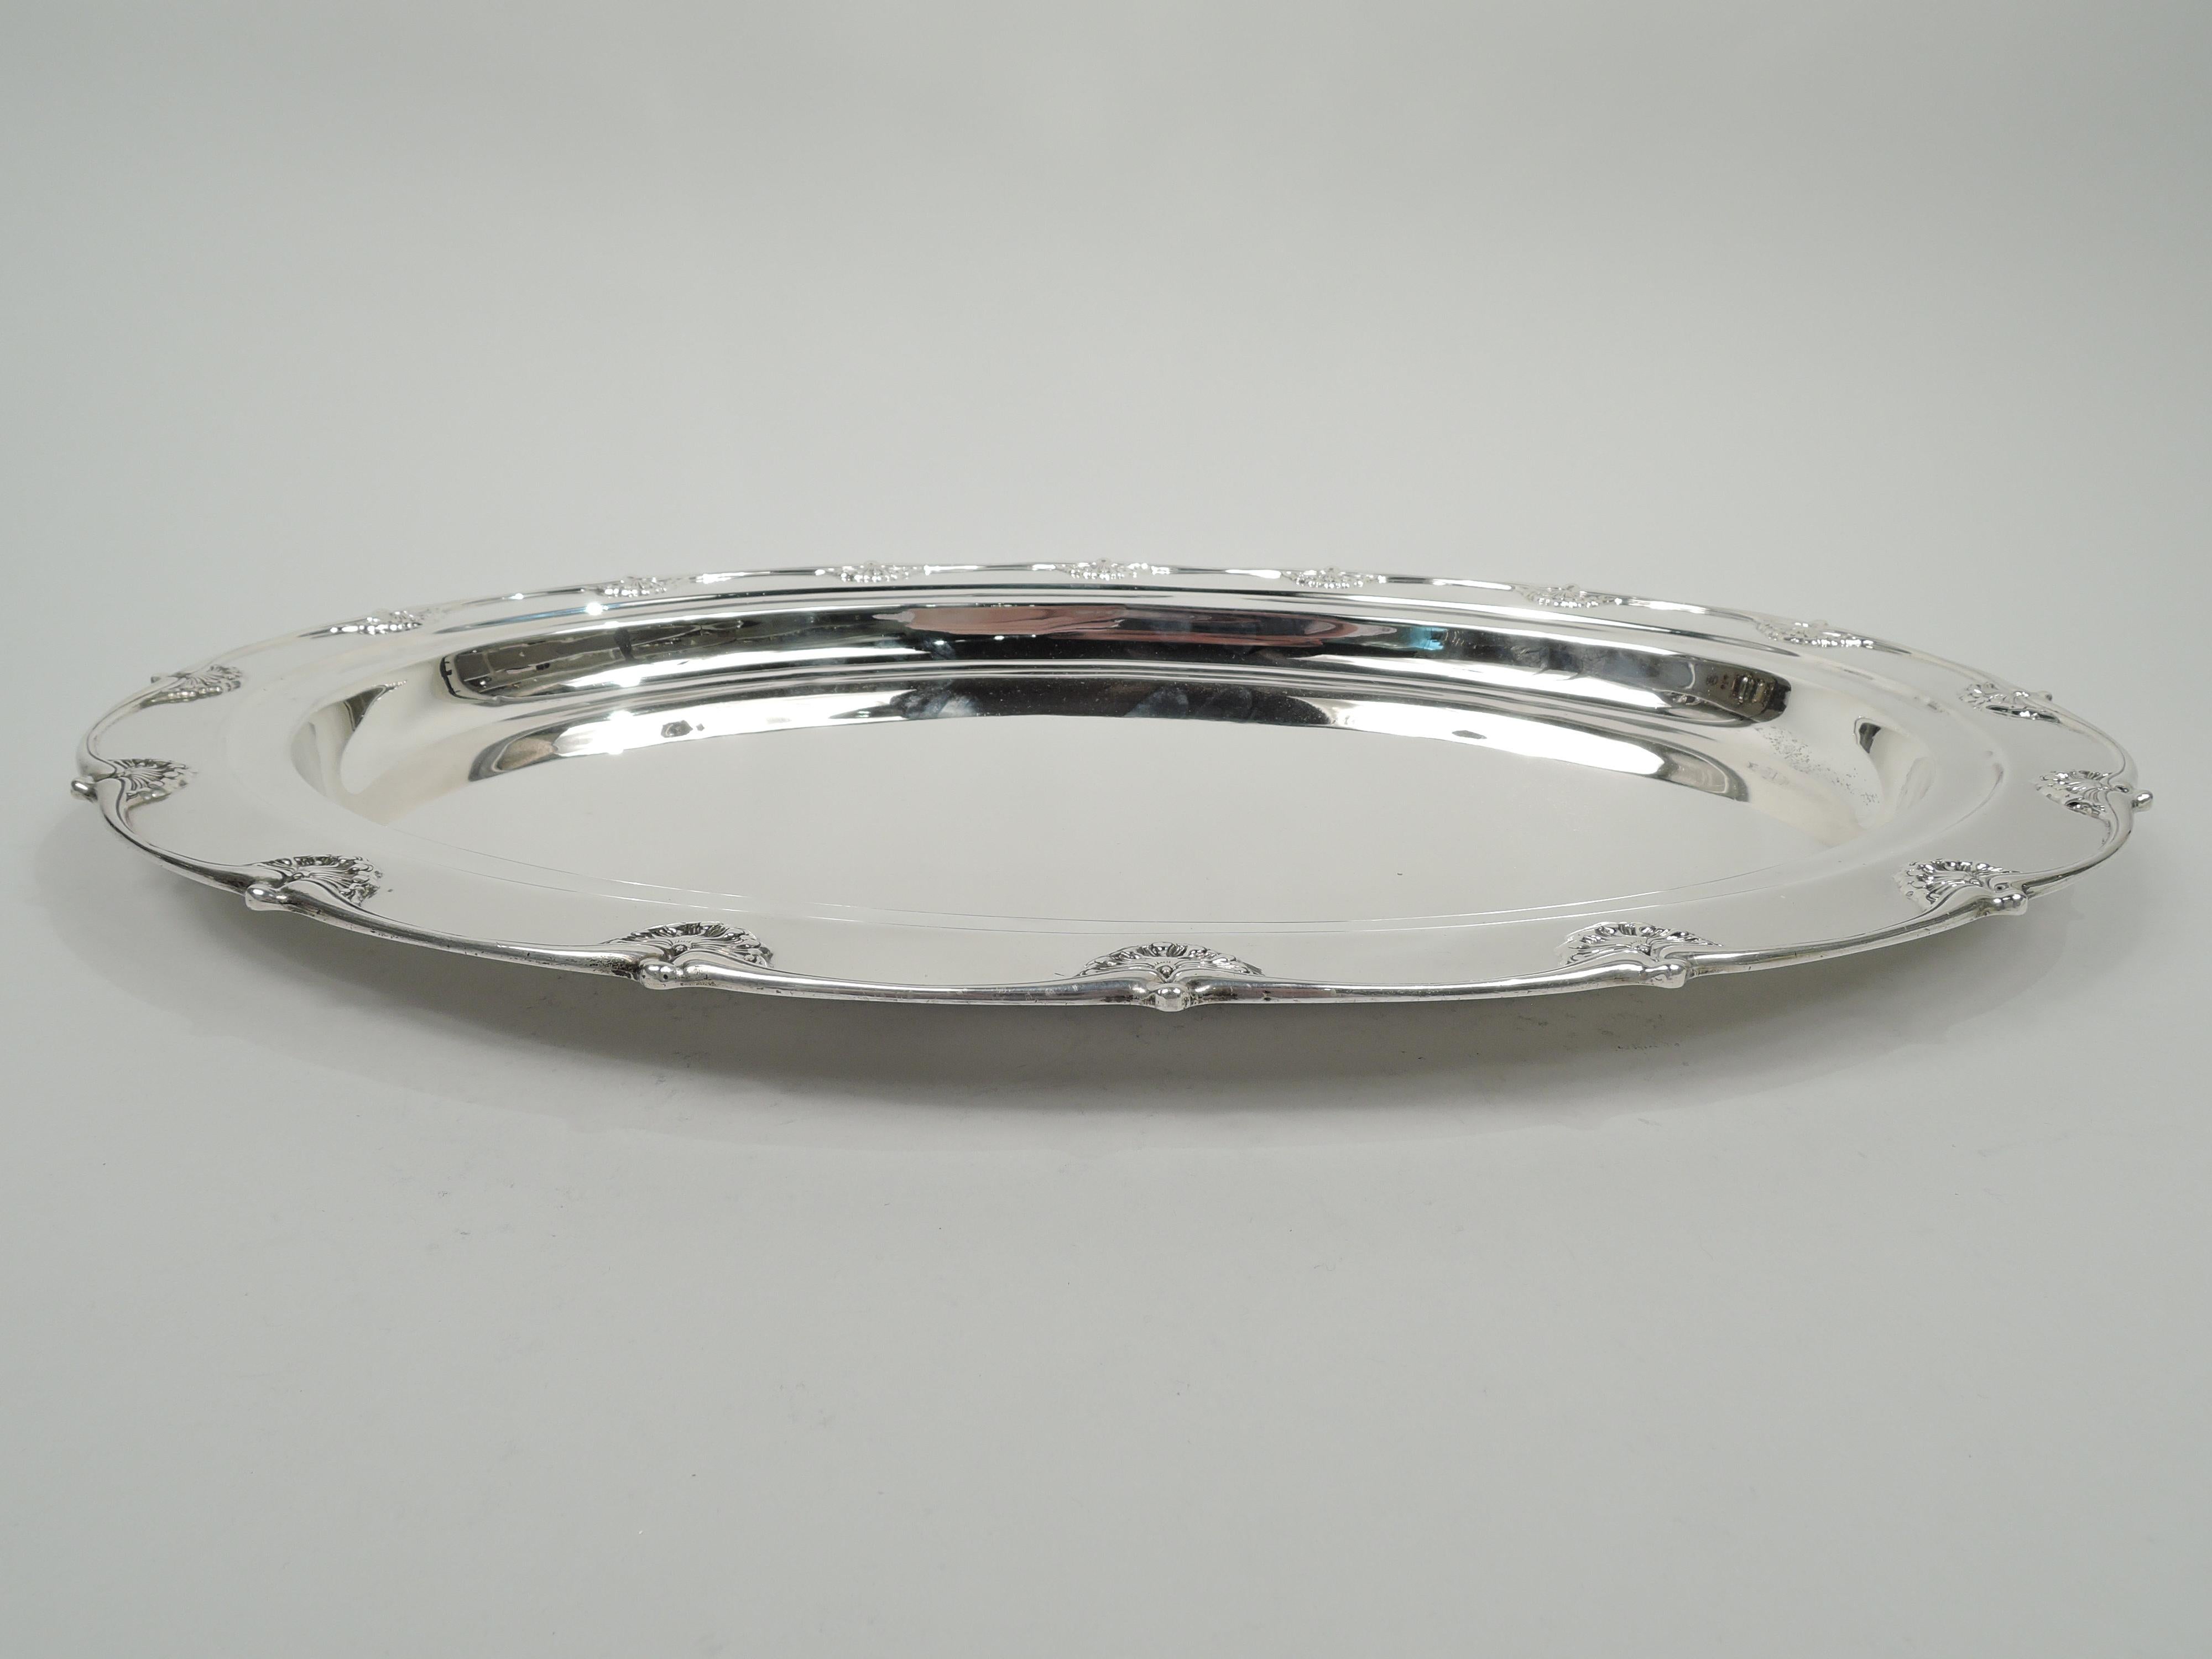 English King sterling silver serving tray. Made by Tiffany & Co. in New York. Oval well and wide and stepped shoulder. Applied gently undulating rim interspersed with scallop shells. Fully marked including maker’s stamp, pattern no. 11742, and